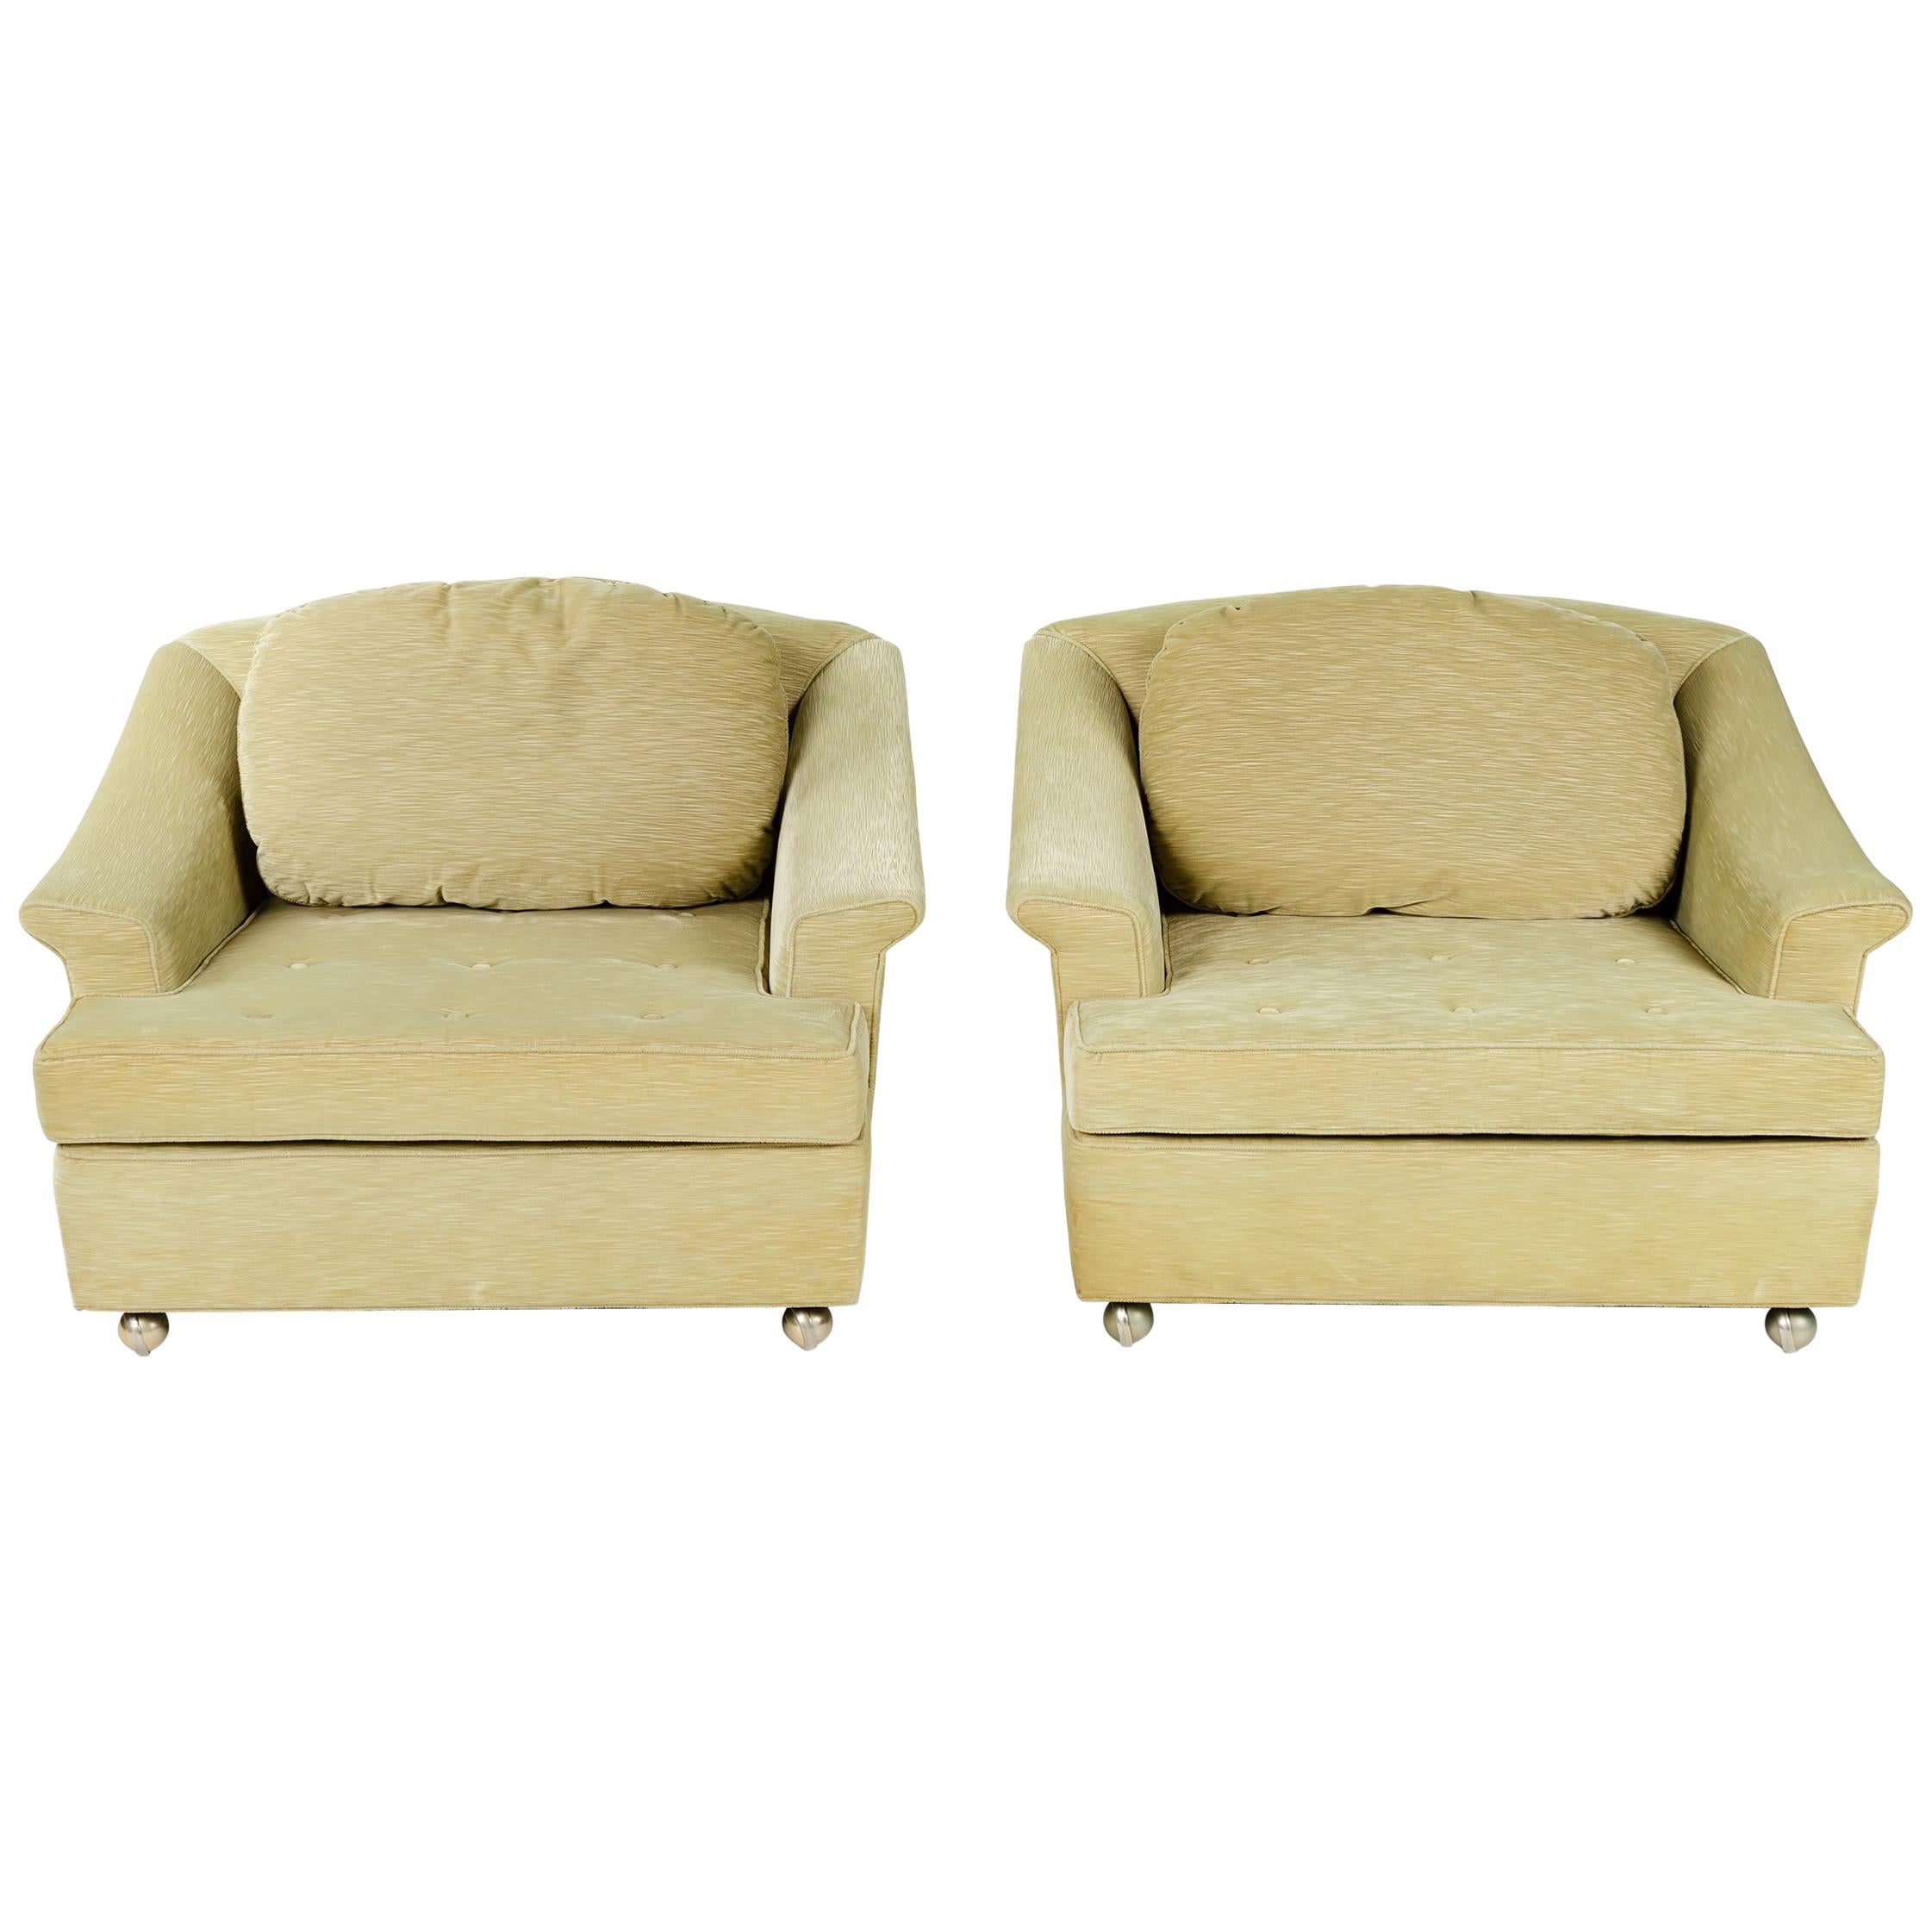 Pair of Pillow Back Lounge Chairs by Edward Wormley